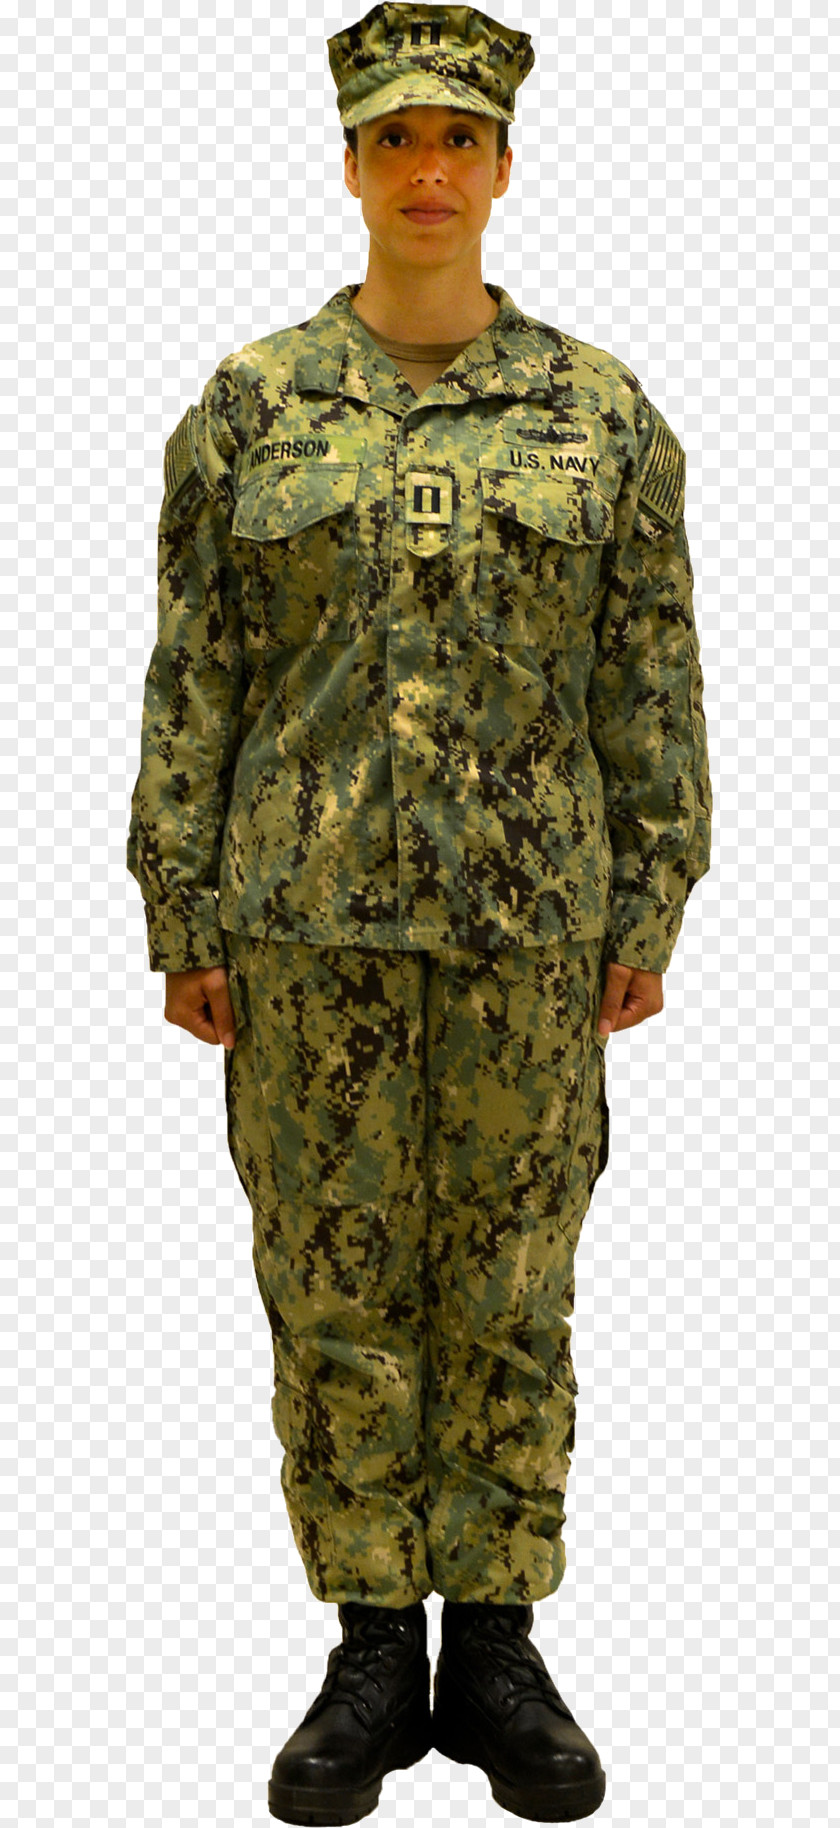 Uniform Uniforms Of The United States Navy Military Camouflage Army Combat Armed Forces PNG